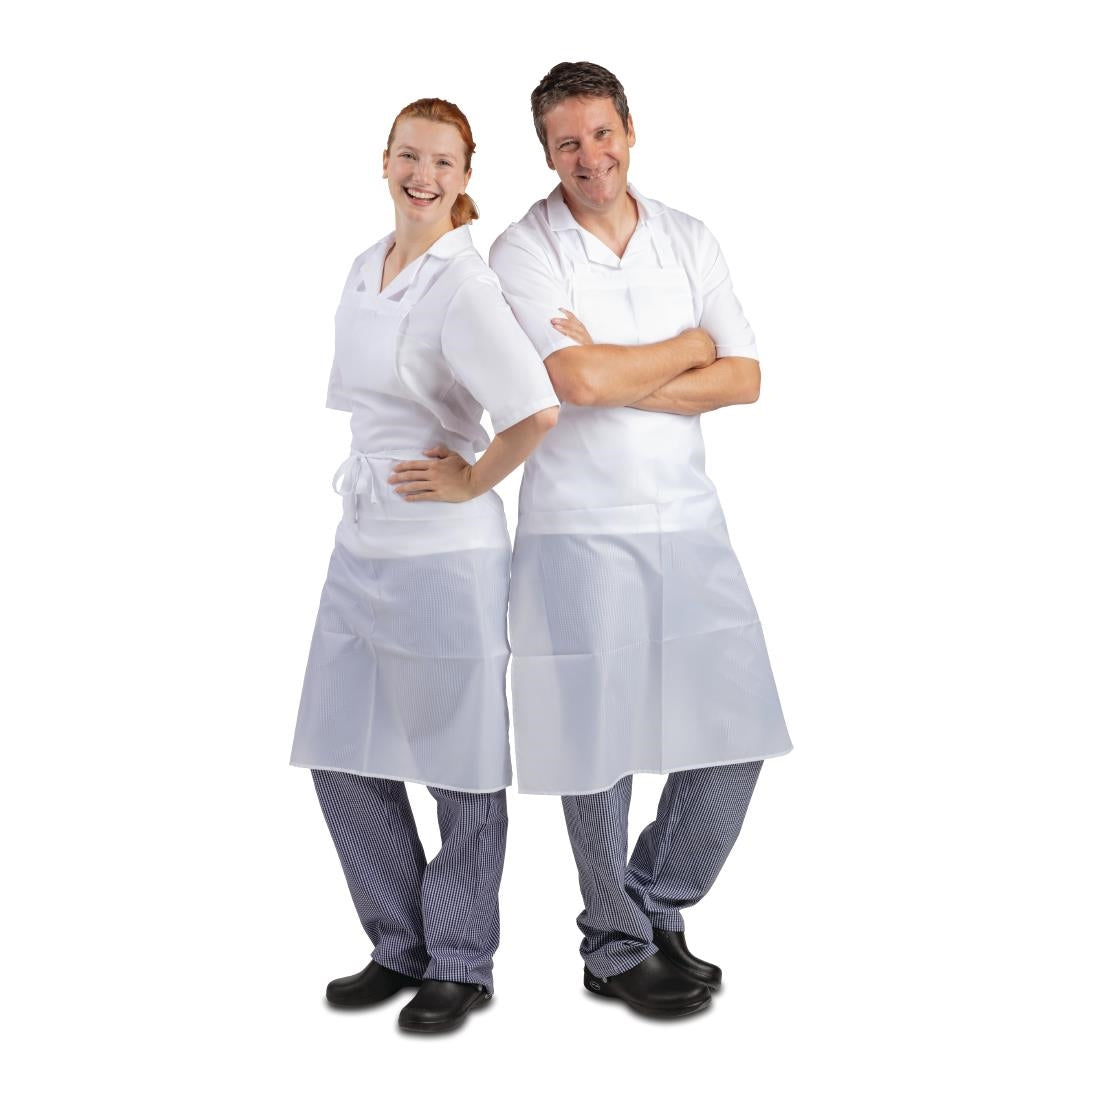 A897 Whites Water Resistant Bib Apron White JD Catering Equipment Solutions Ltd